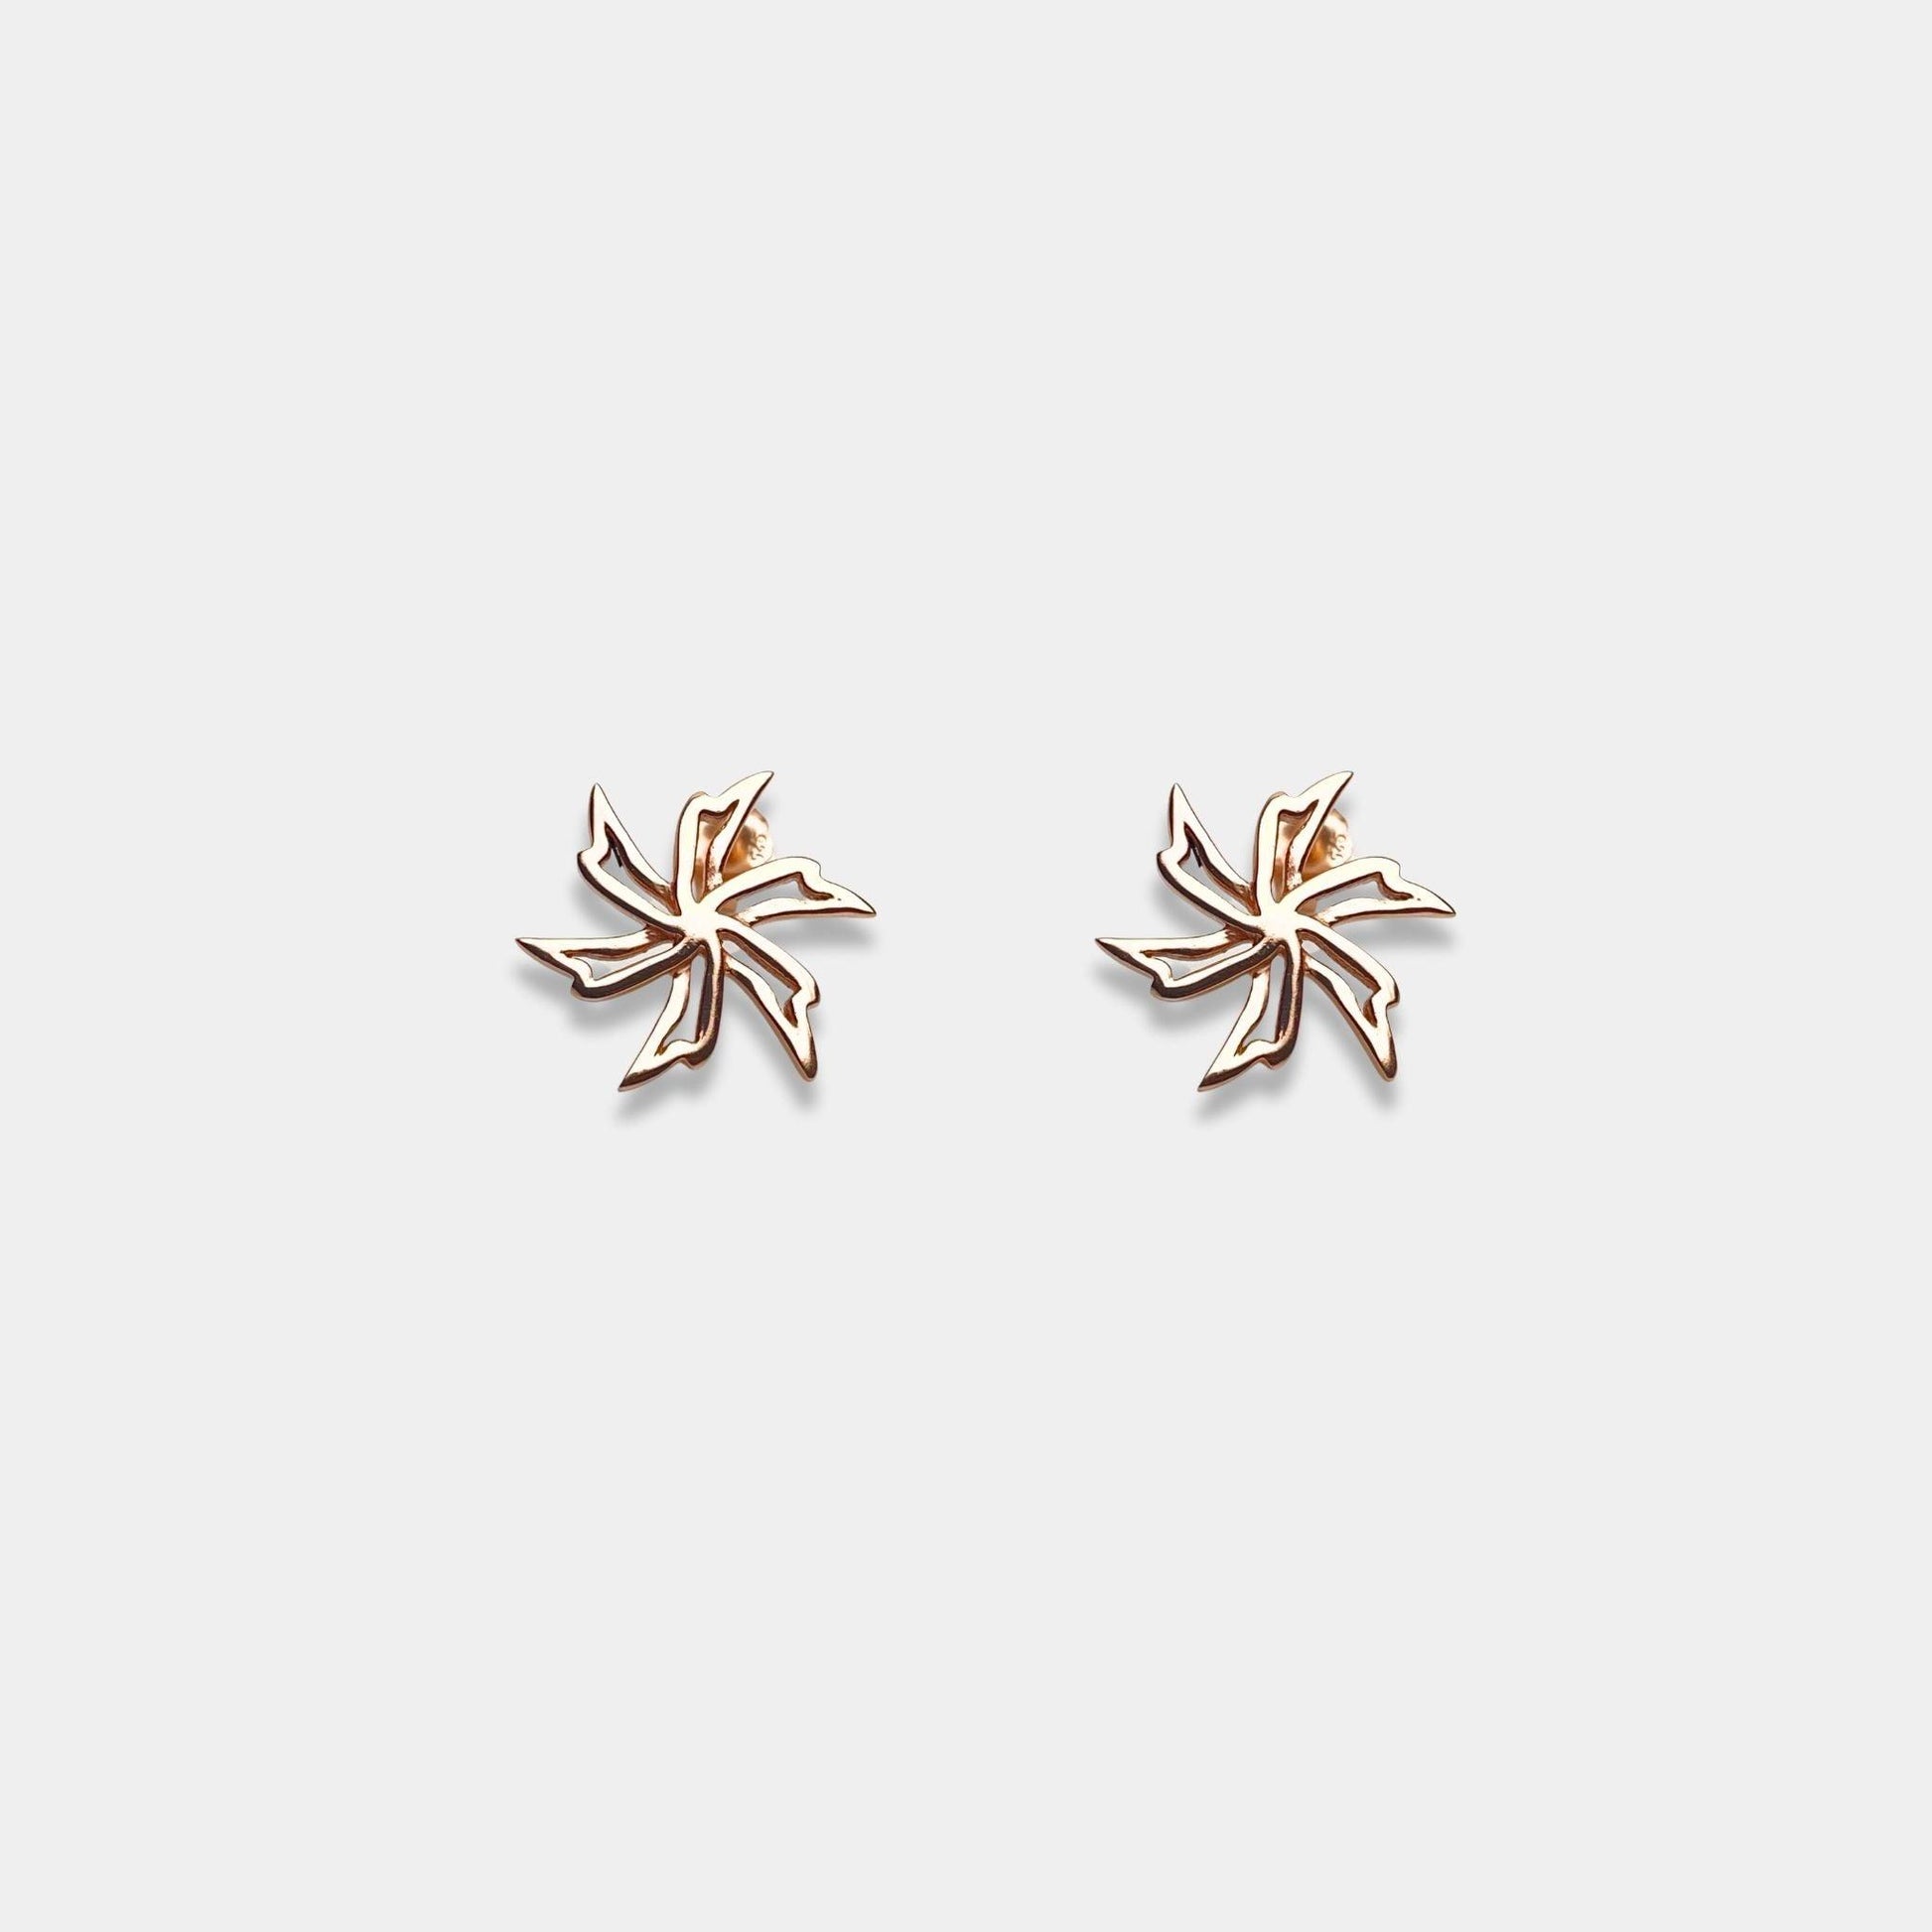 Shimmering silver earrings featuring a star design, a stylish accessory for any occasion